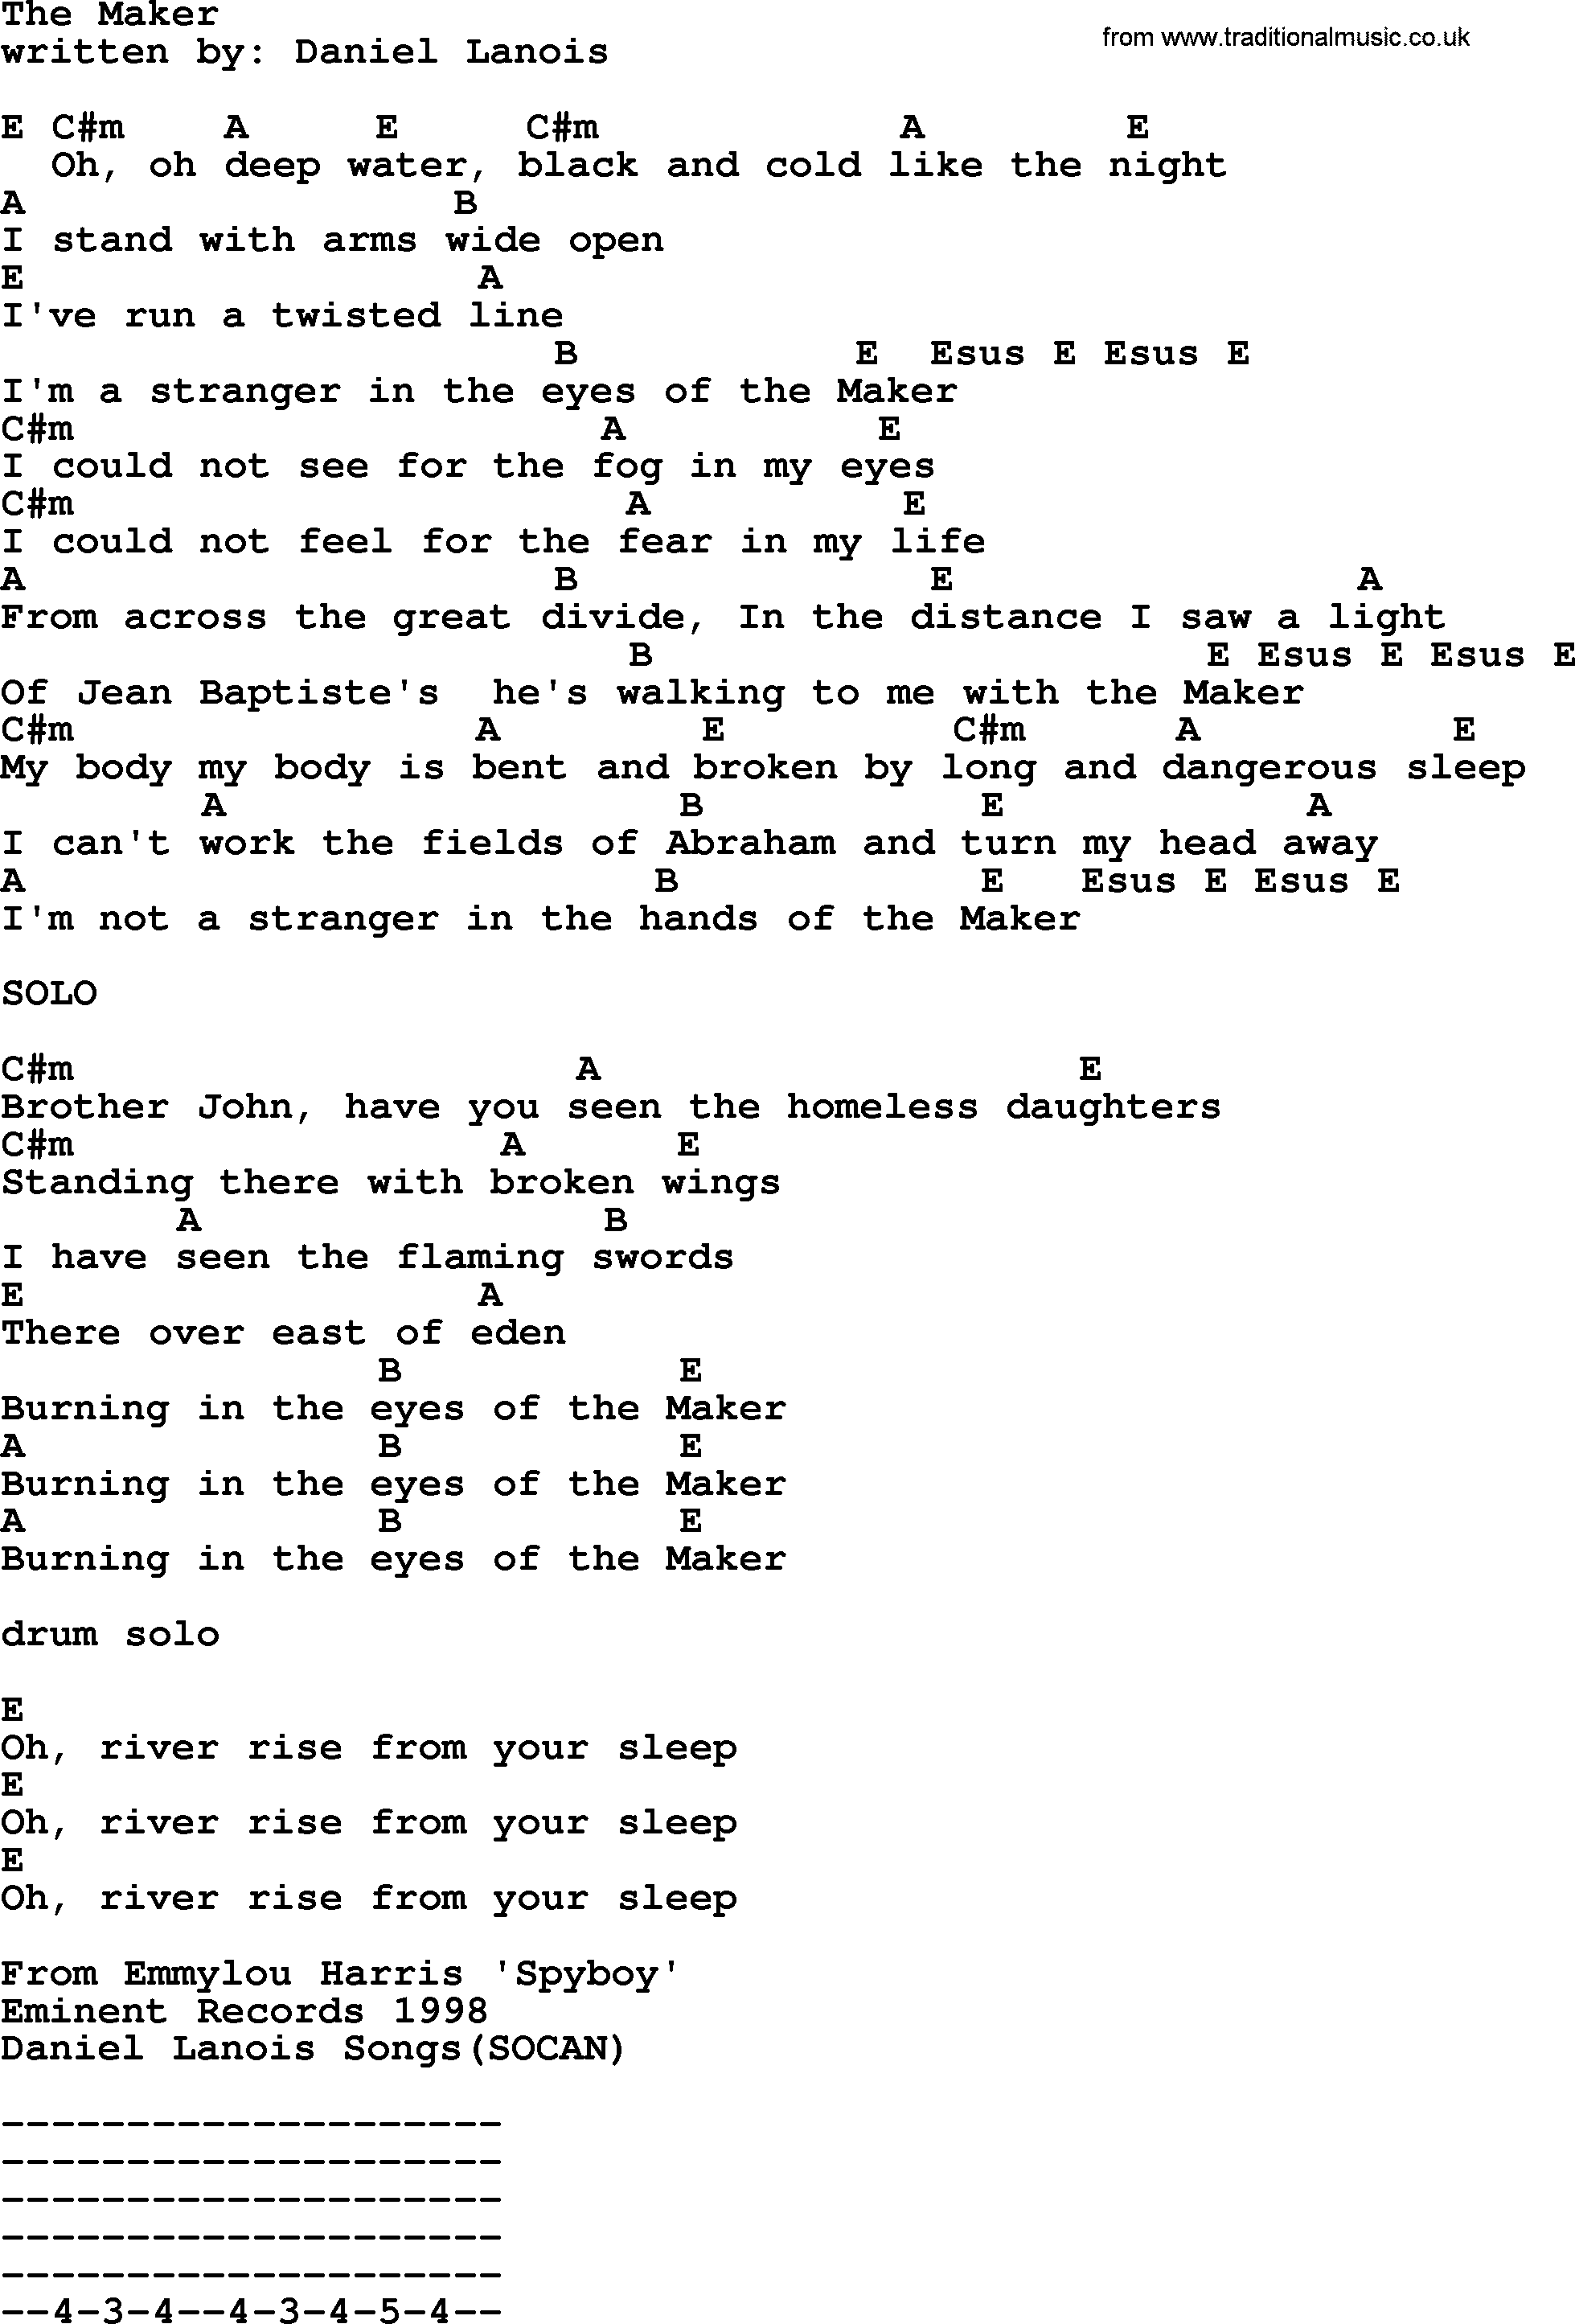 Emmylou Harris song: The Maker lyrics and chords